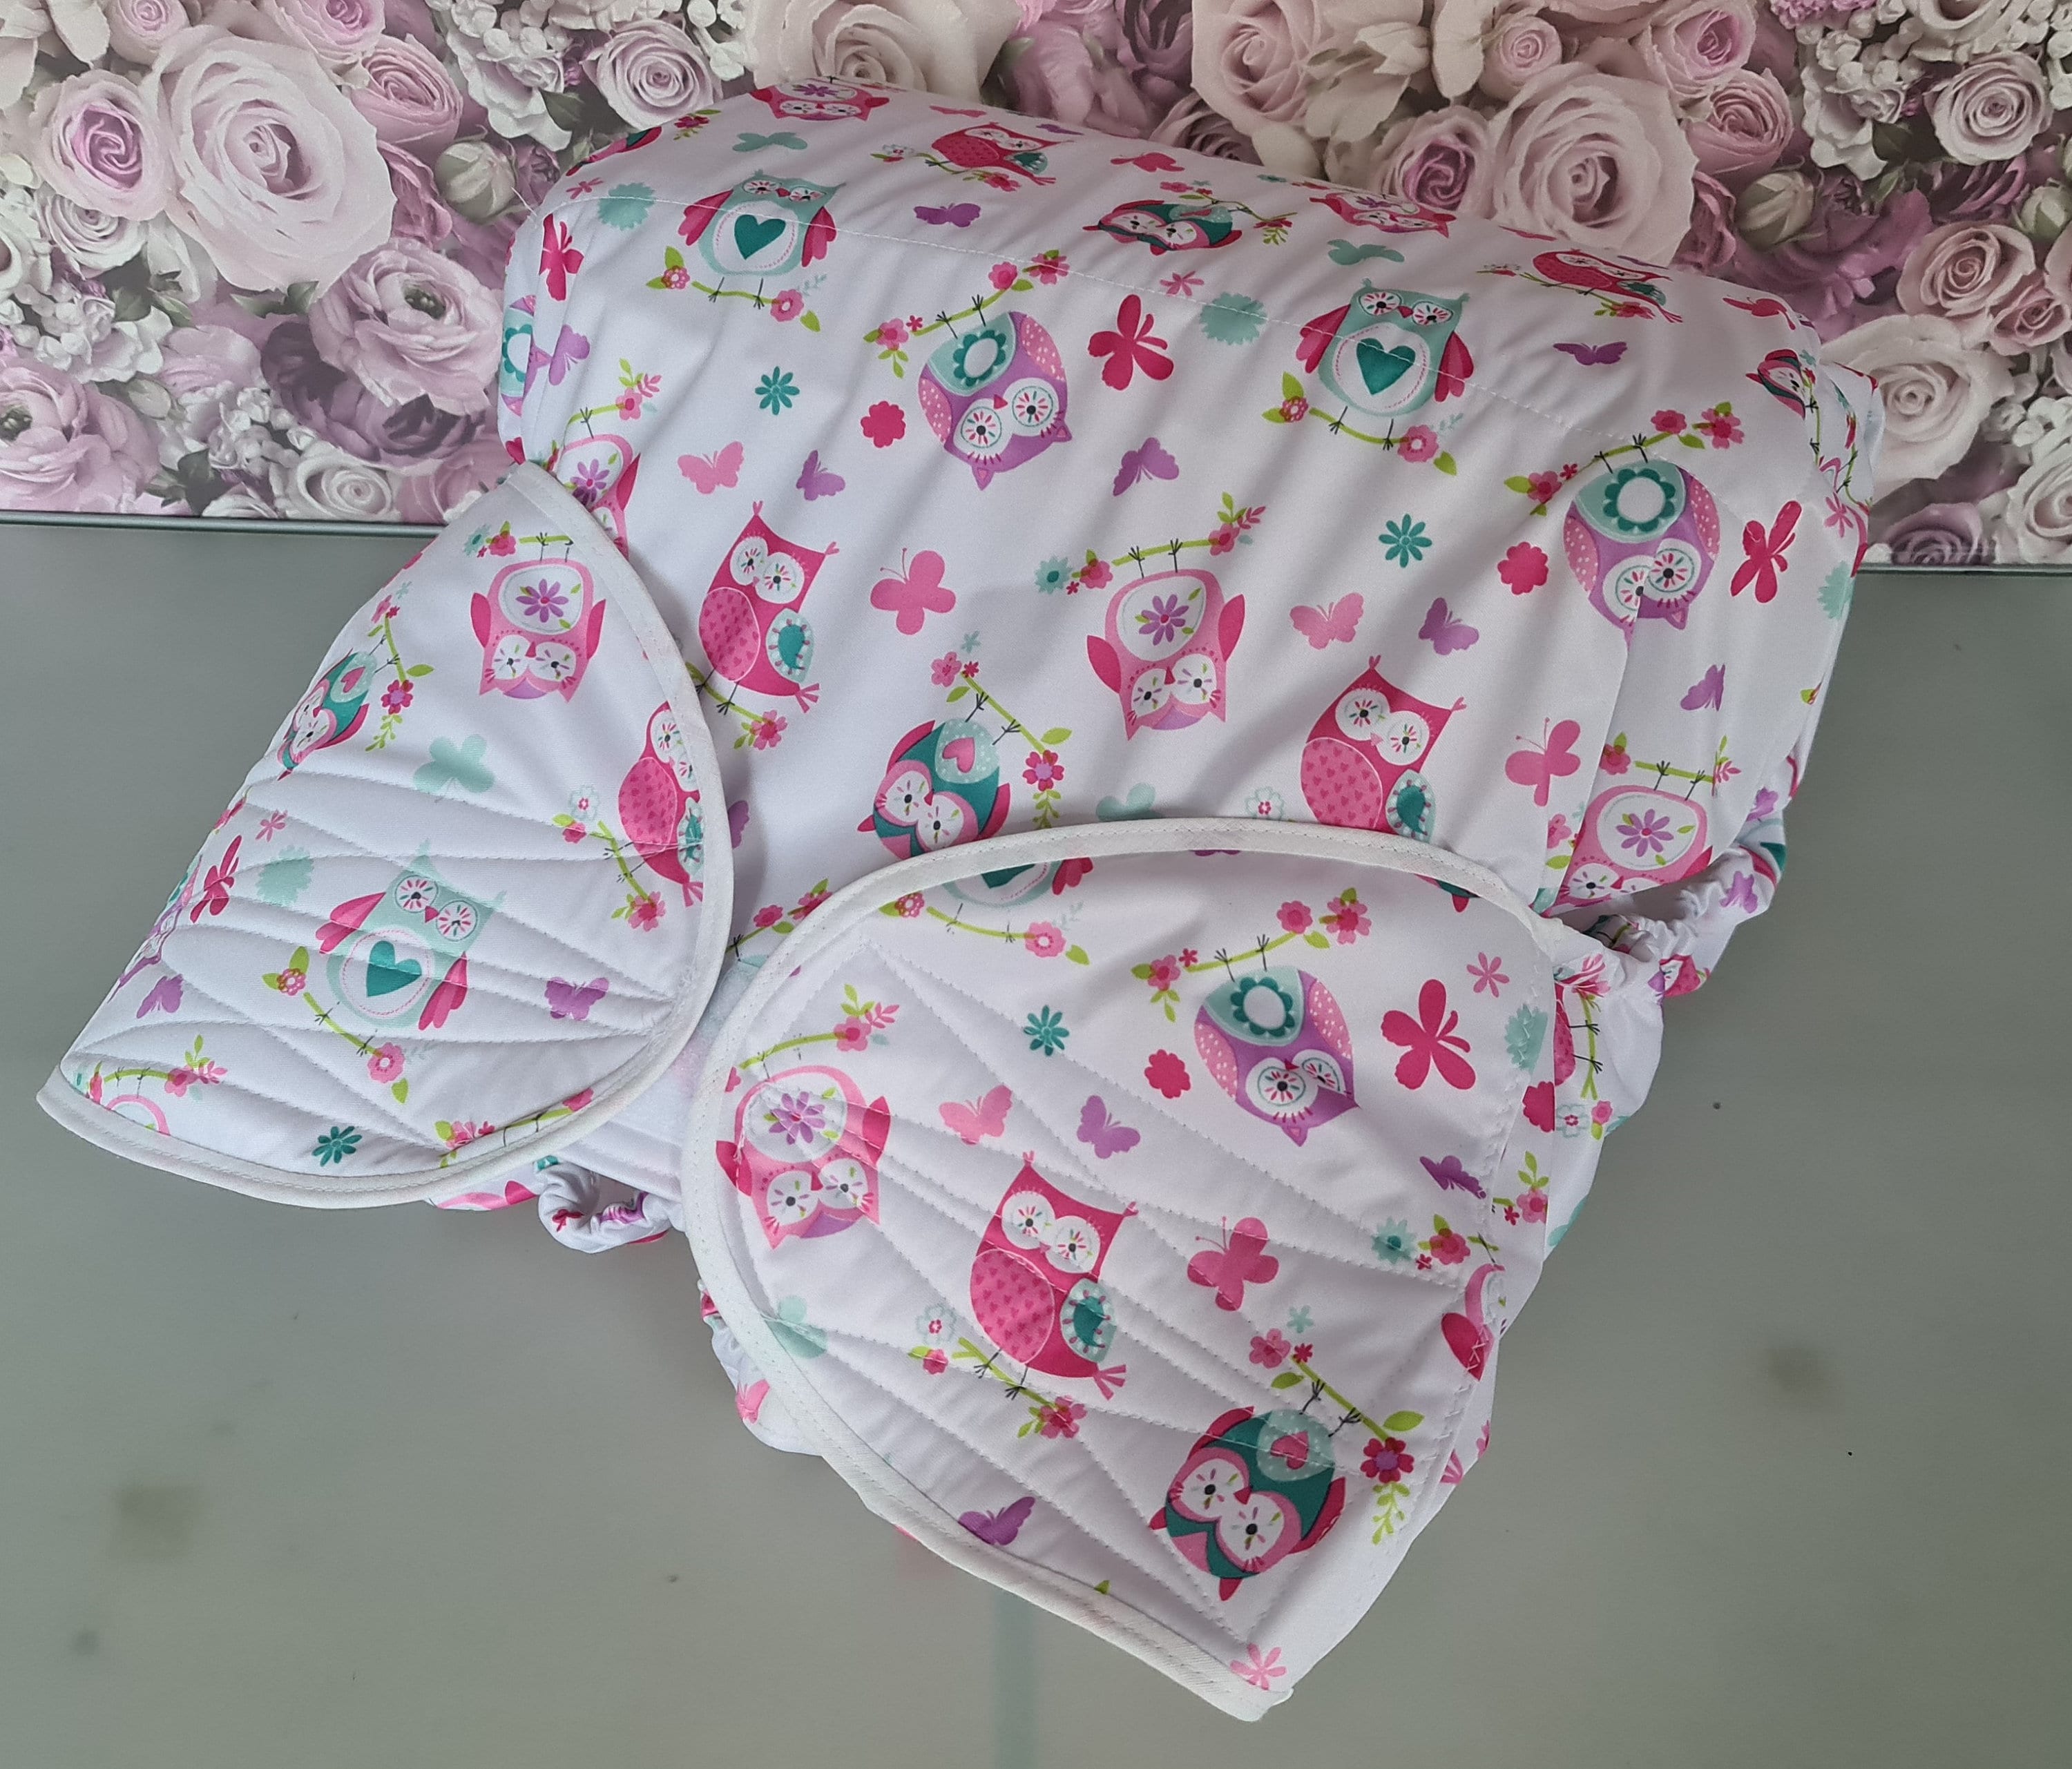 Rearz Princess 5 Piece Medium Diaper Combo 2 Diapers 1 Face Mask 1 Pacifier  and 1 Pair of M-L Pink Plastic Diaper Cover. -  Finland